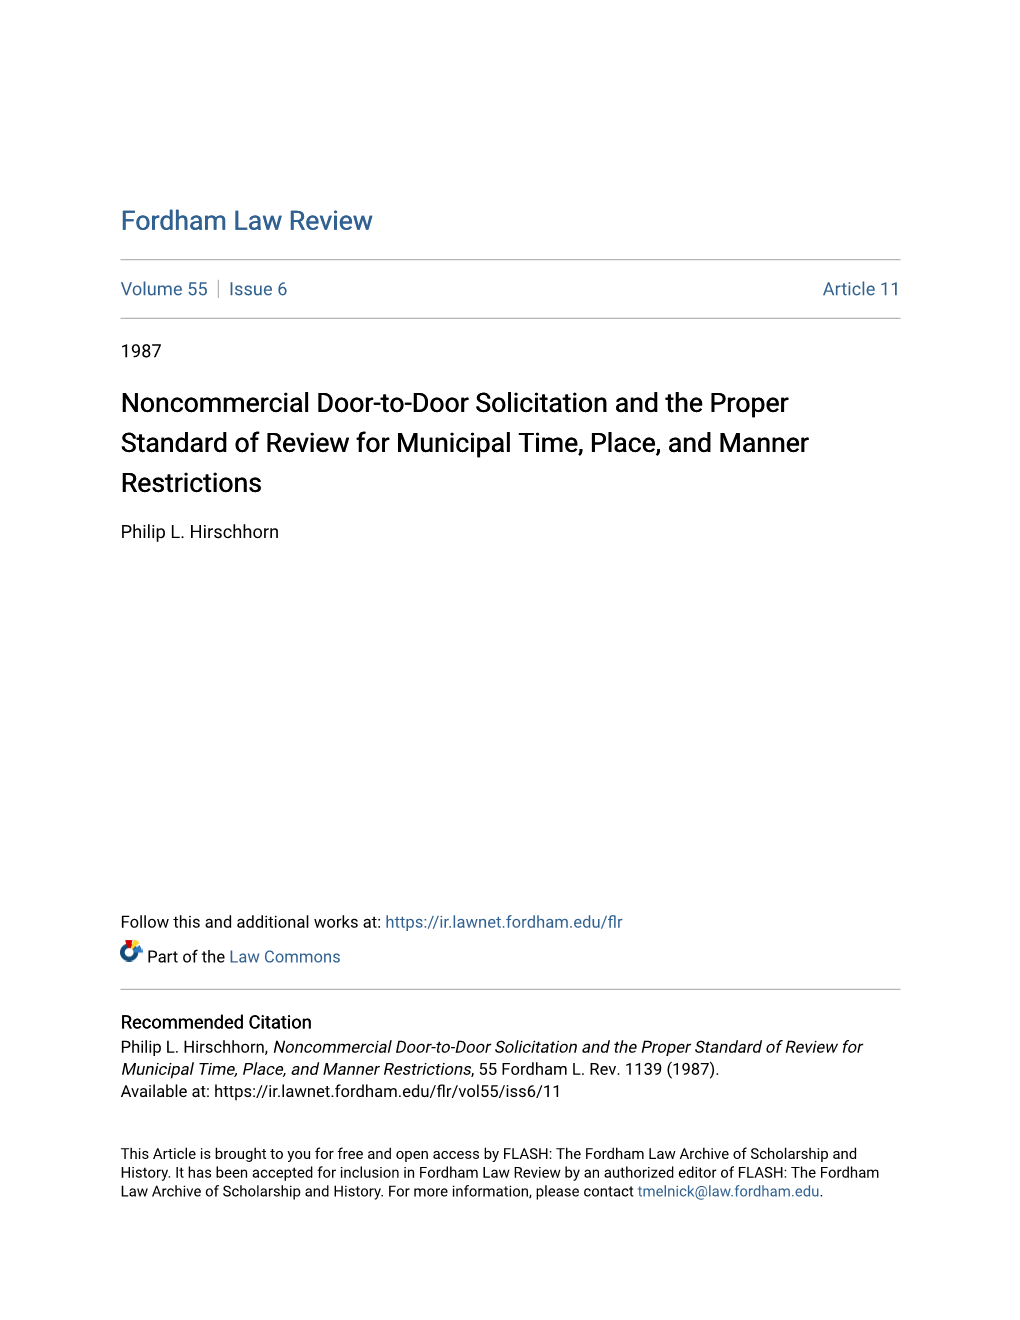 Noncommercial Door-To-Door Solicitation and the Proper Standard of Review for Municipal Time, Place, and Manner Restrictions